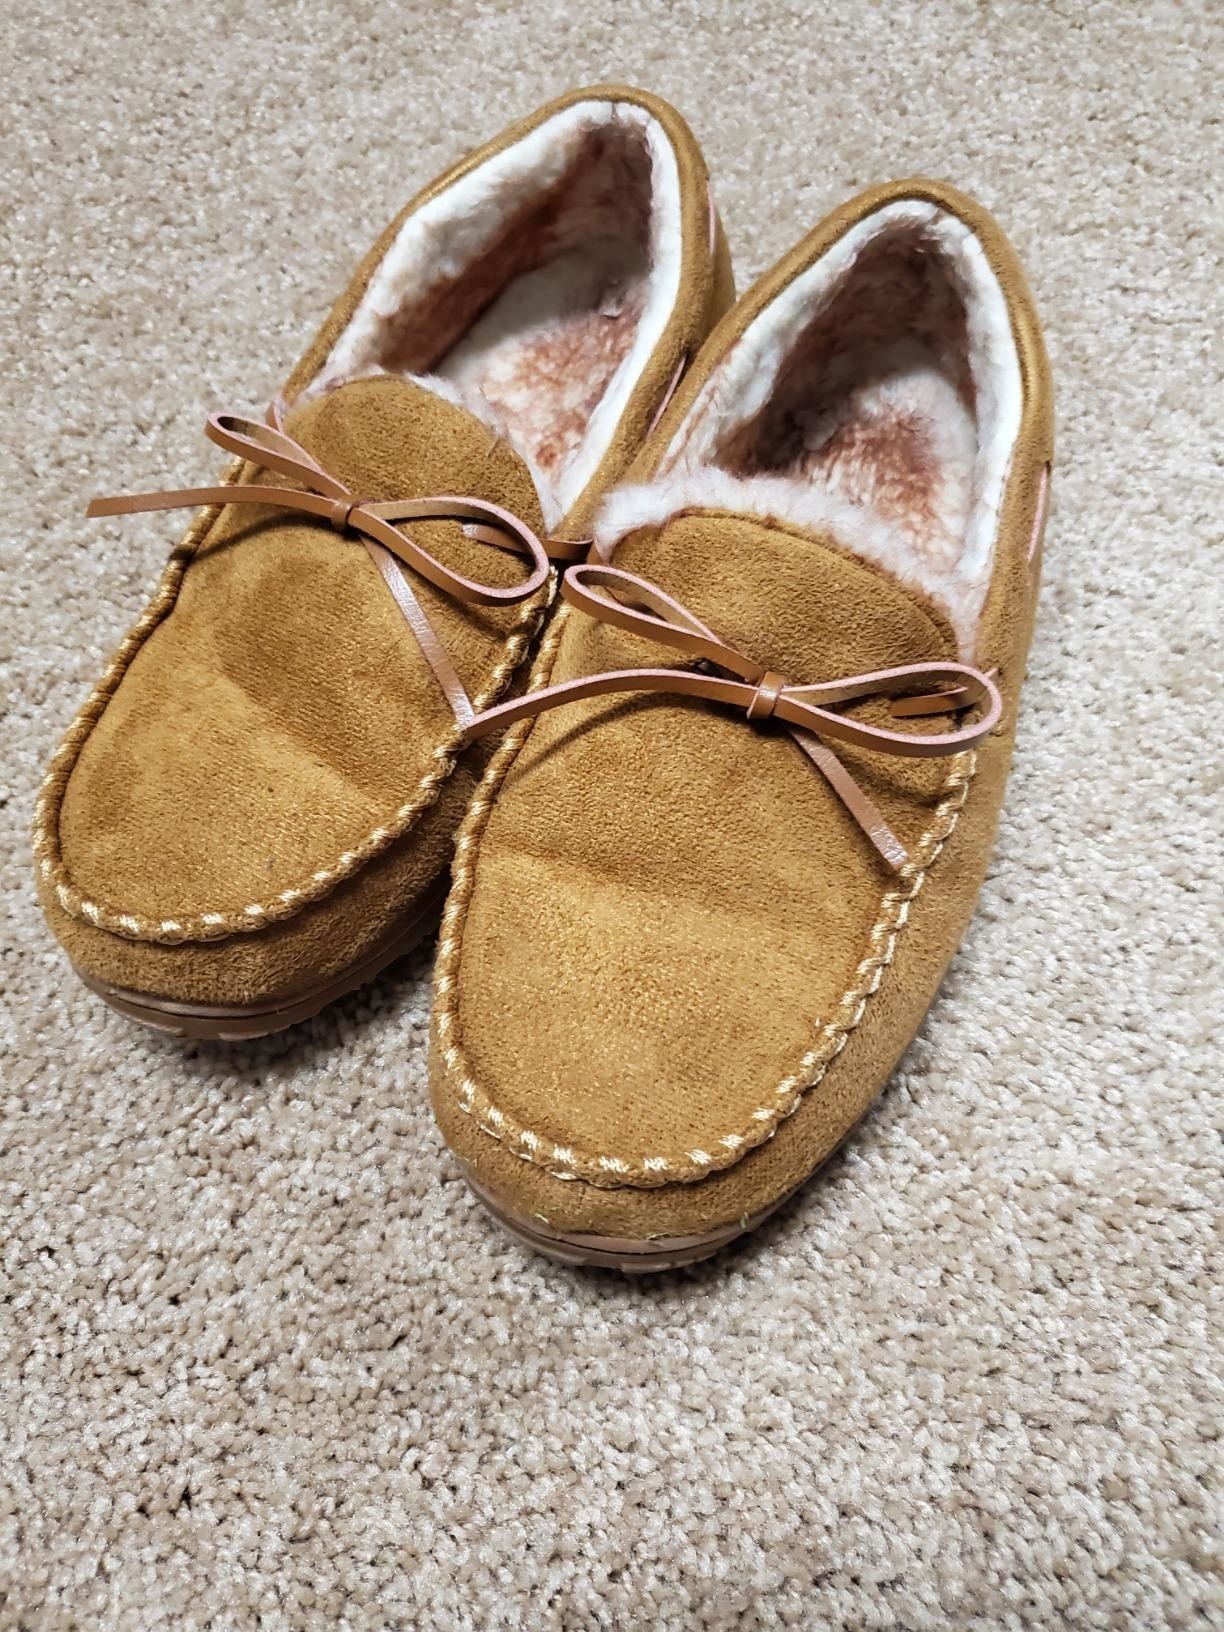 the light brown moccasins with ties on top and white fuzzy insides